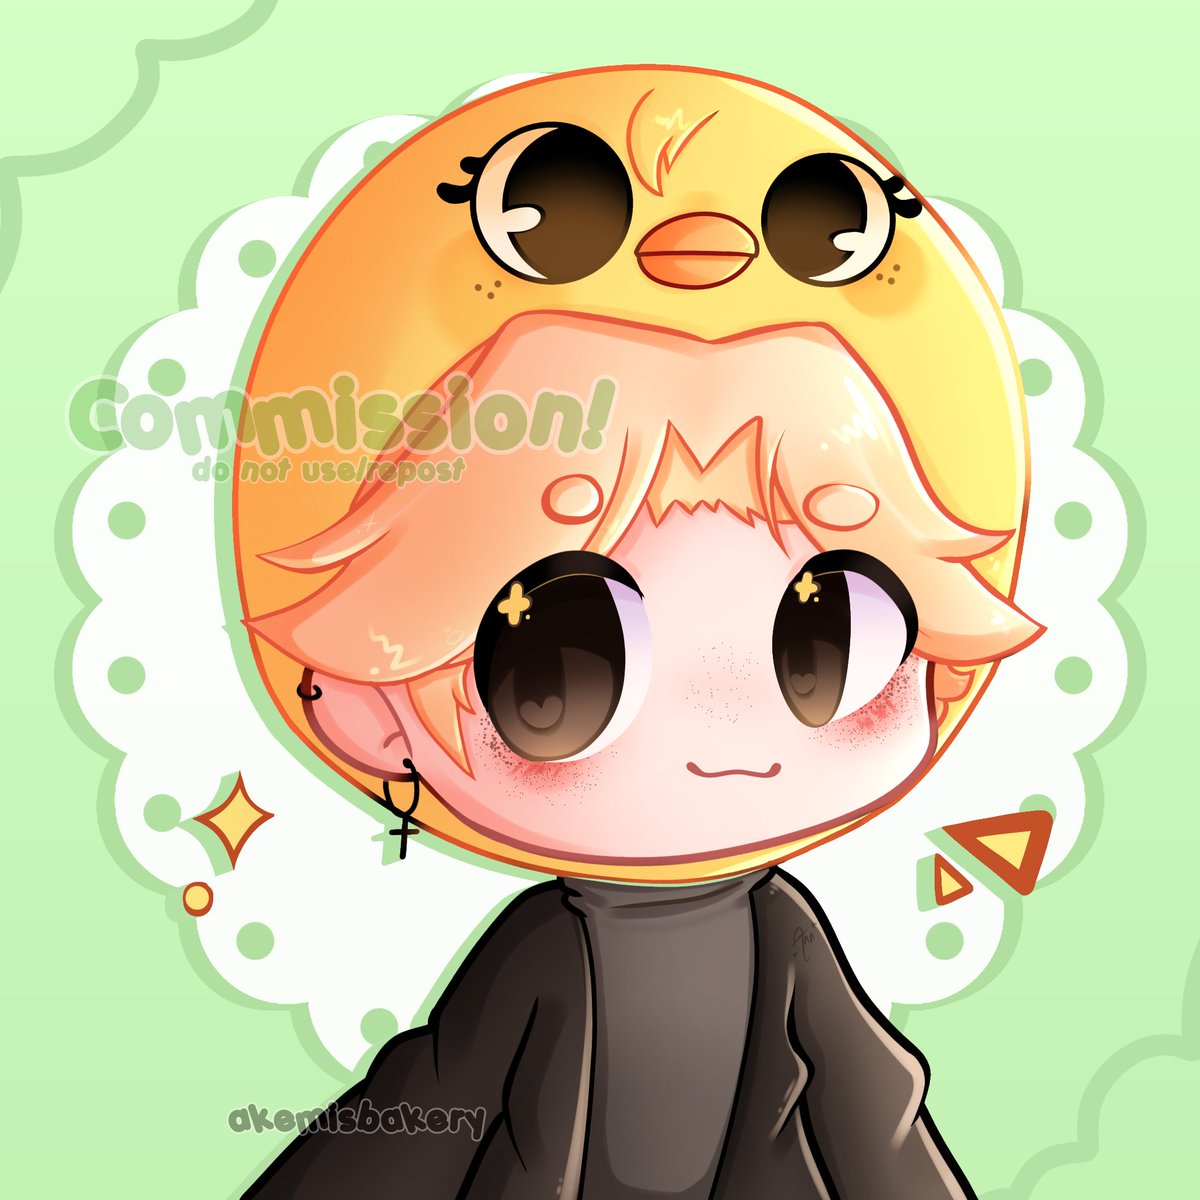 Chibi Icon Commission for @/yume.cosplay_02 on IG
TYSM for supporting my work ><
.
#commissionsopen #commission #ArtCommission #art #chibi #chibicommission #chibiart #icon #artist #straykids #skz #felix #skzoo